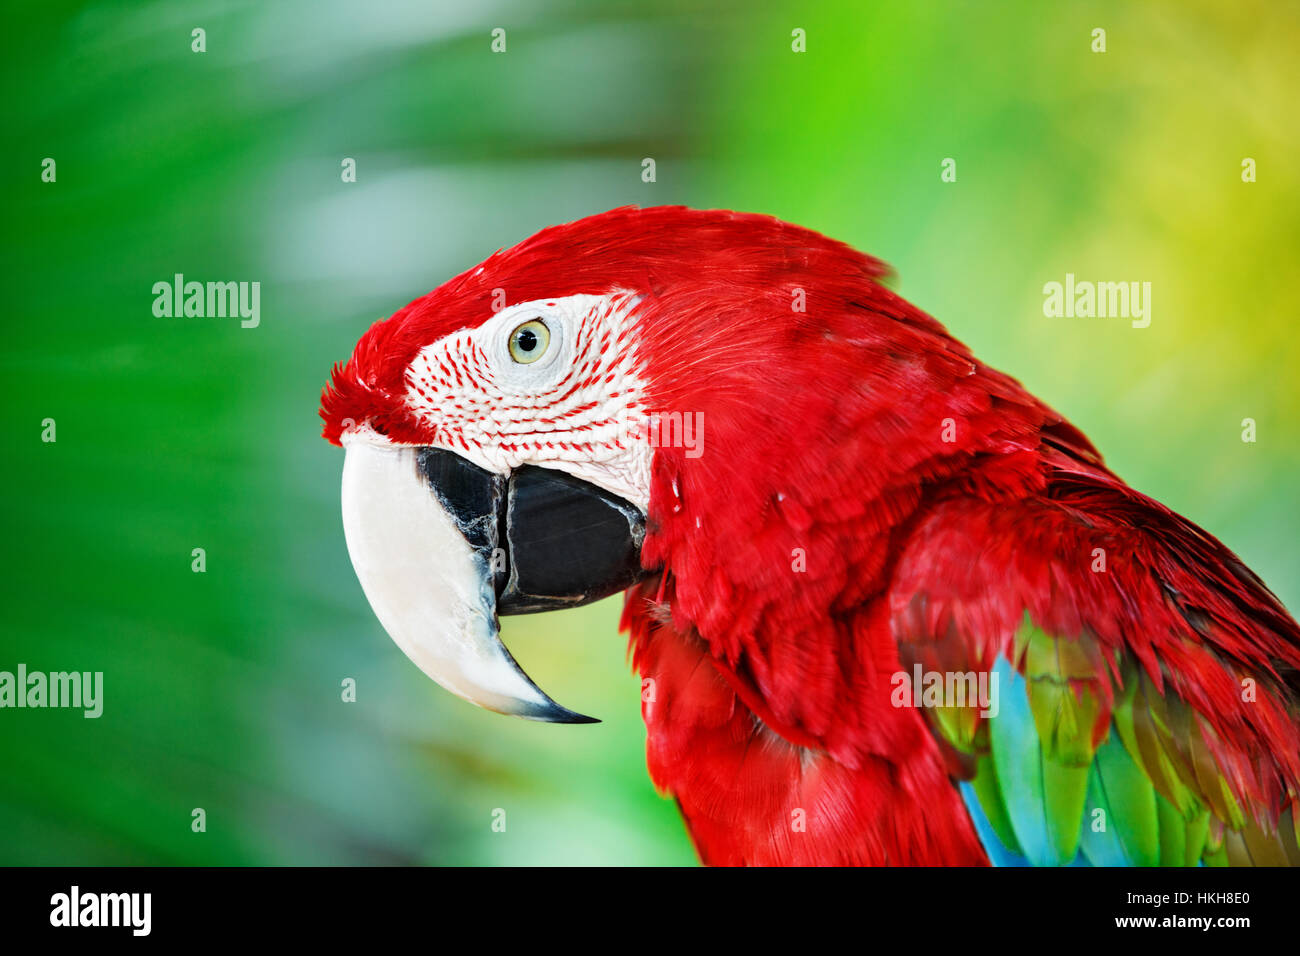 Portrait of red macaw parrot against jungle. Parrot head on green background. Nature, wildlife and tropical rainforest birds. Stock Photo